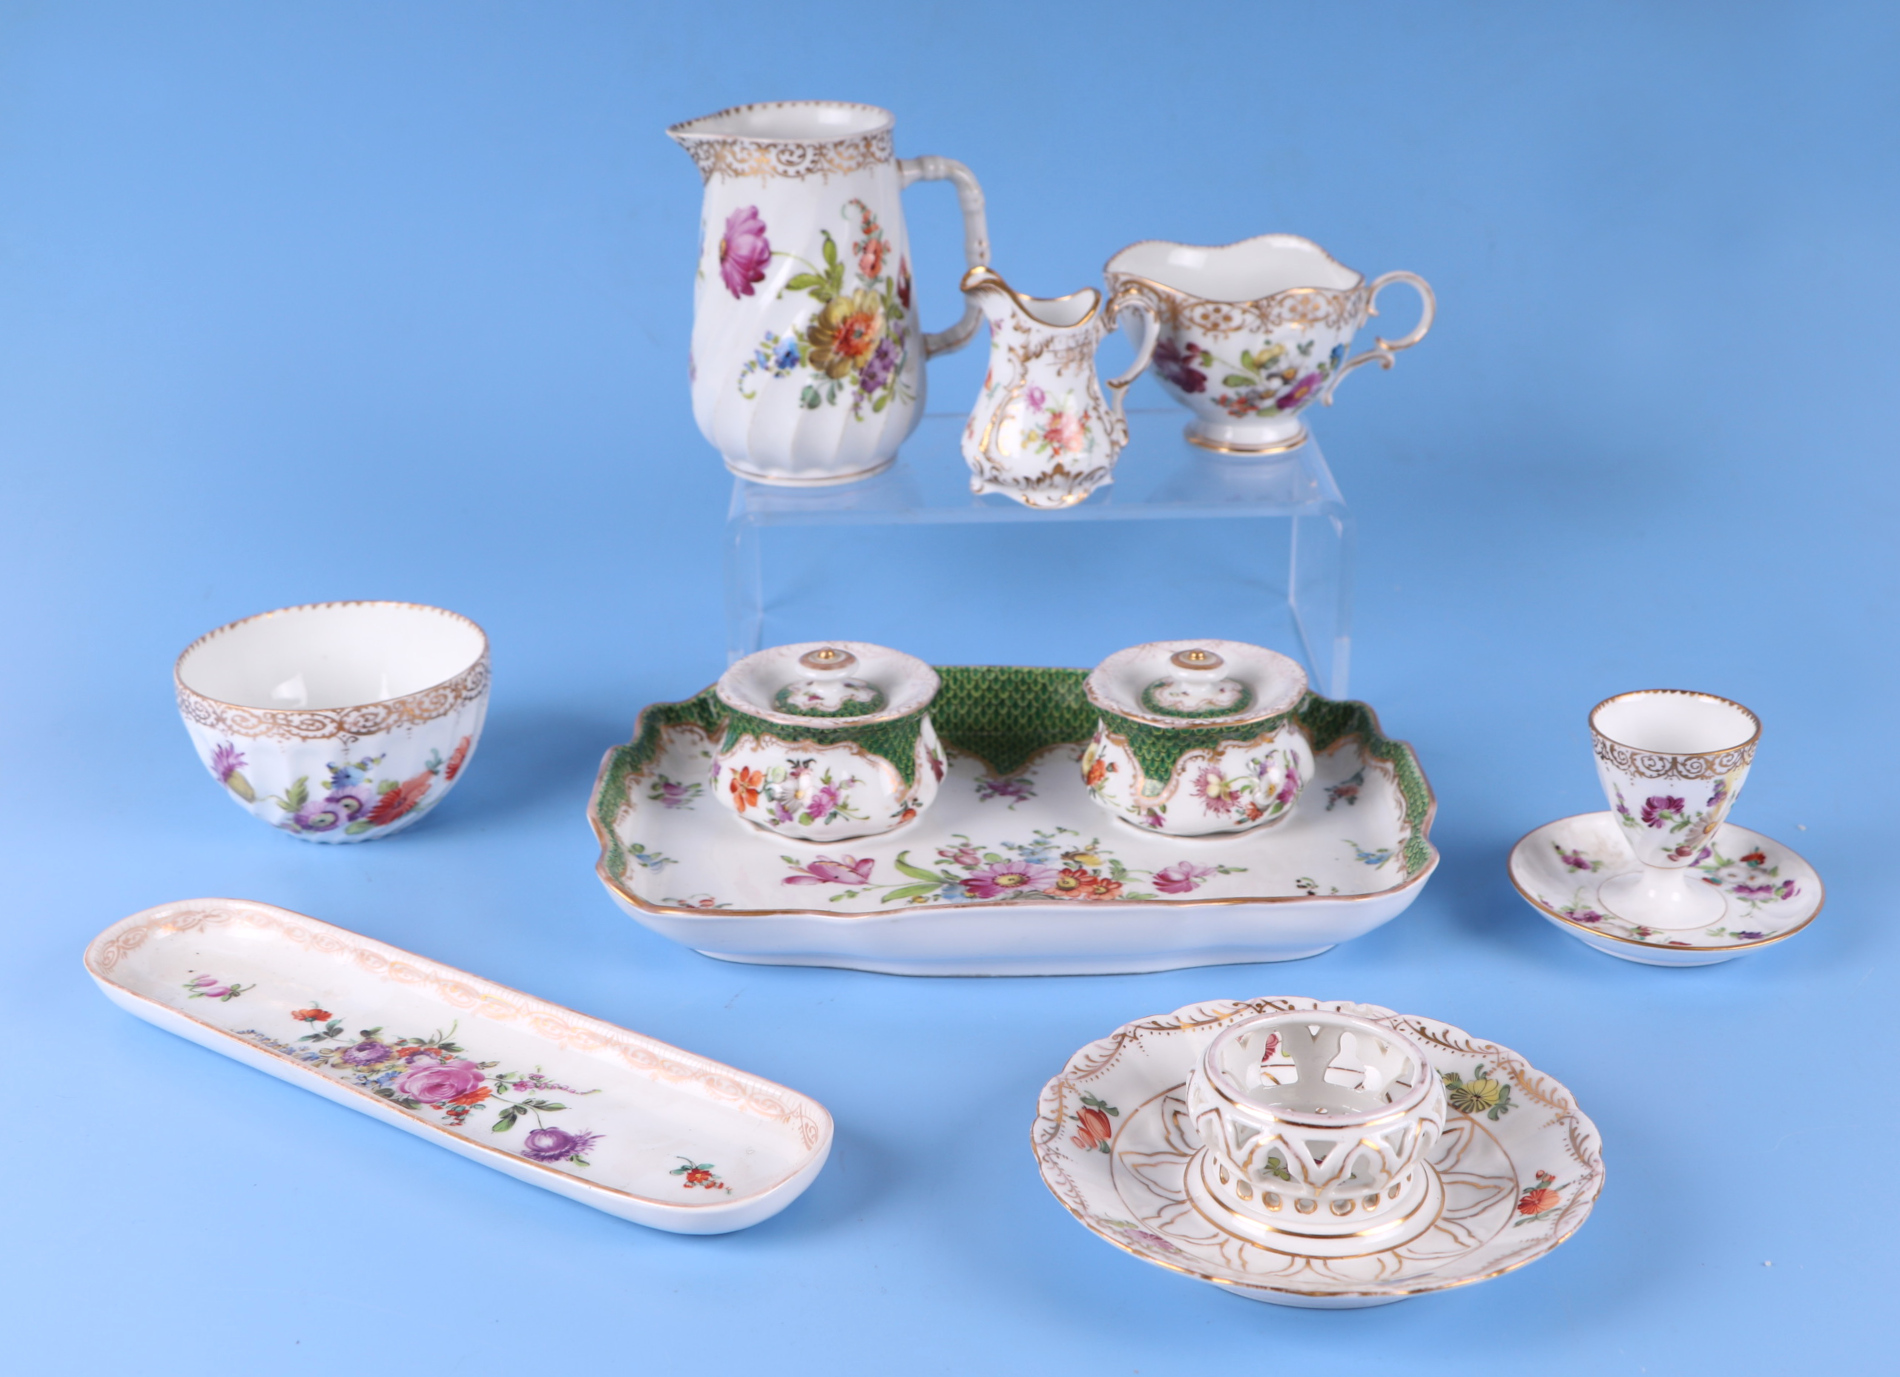 A quantity of Dresden porcelain to include a desk stand, cream jug, plates and other items. - Image 2 of 3